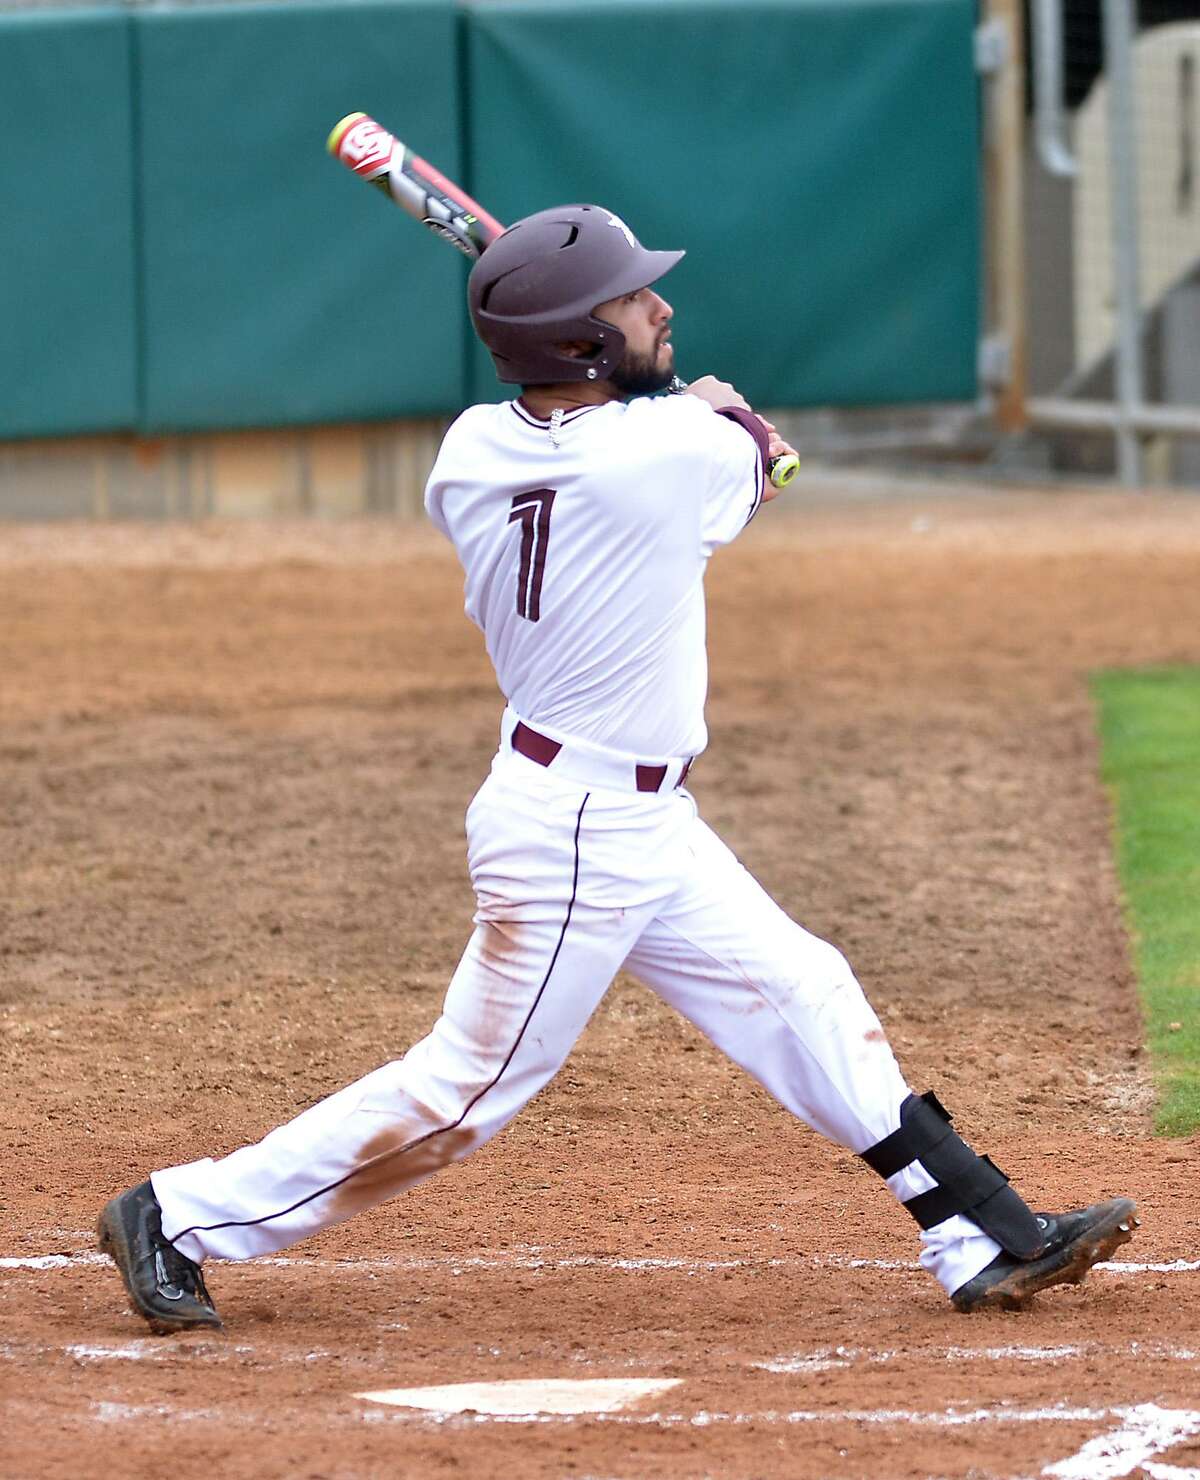 Jesse Phipps and the TAMIU baseball team saw its Tuesday matchup with St. Edward’s pushed back to an undetermined date. The Hilltoppers were in Oklahoma this past weekend, and weather and travel delays forced the postponement.